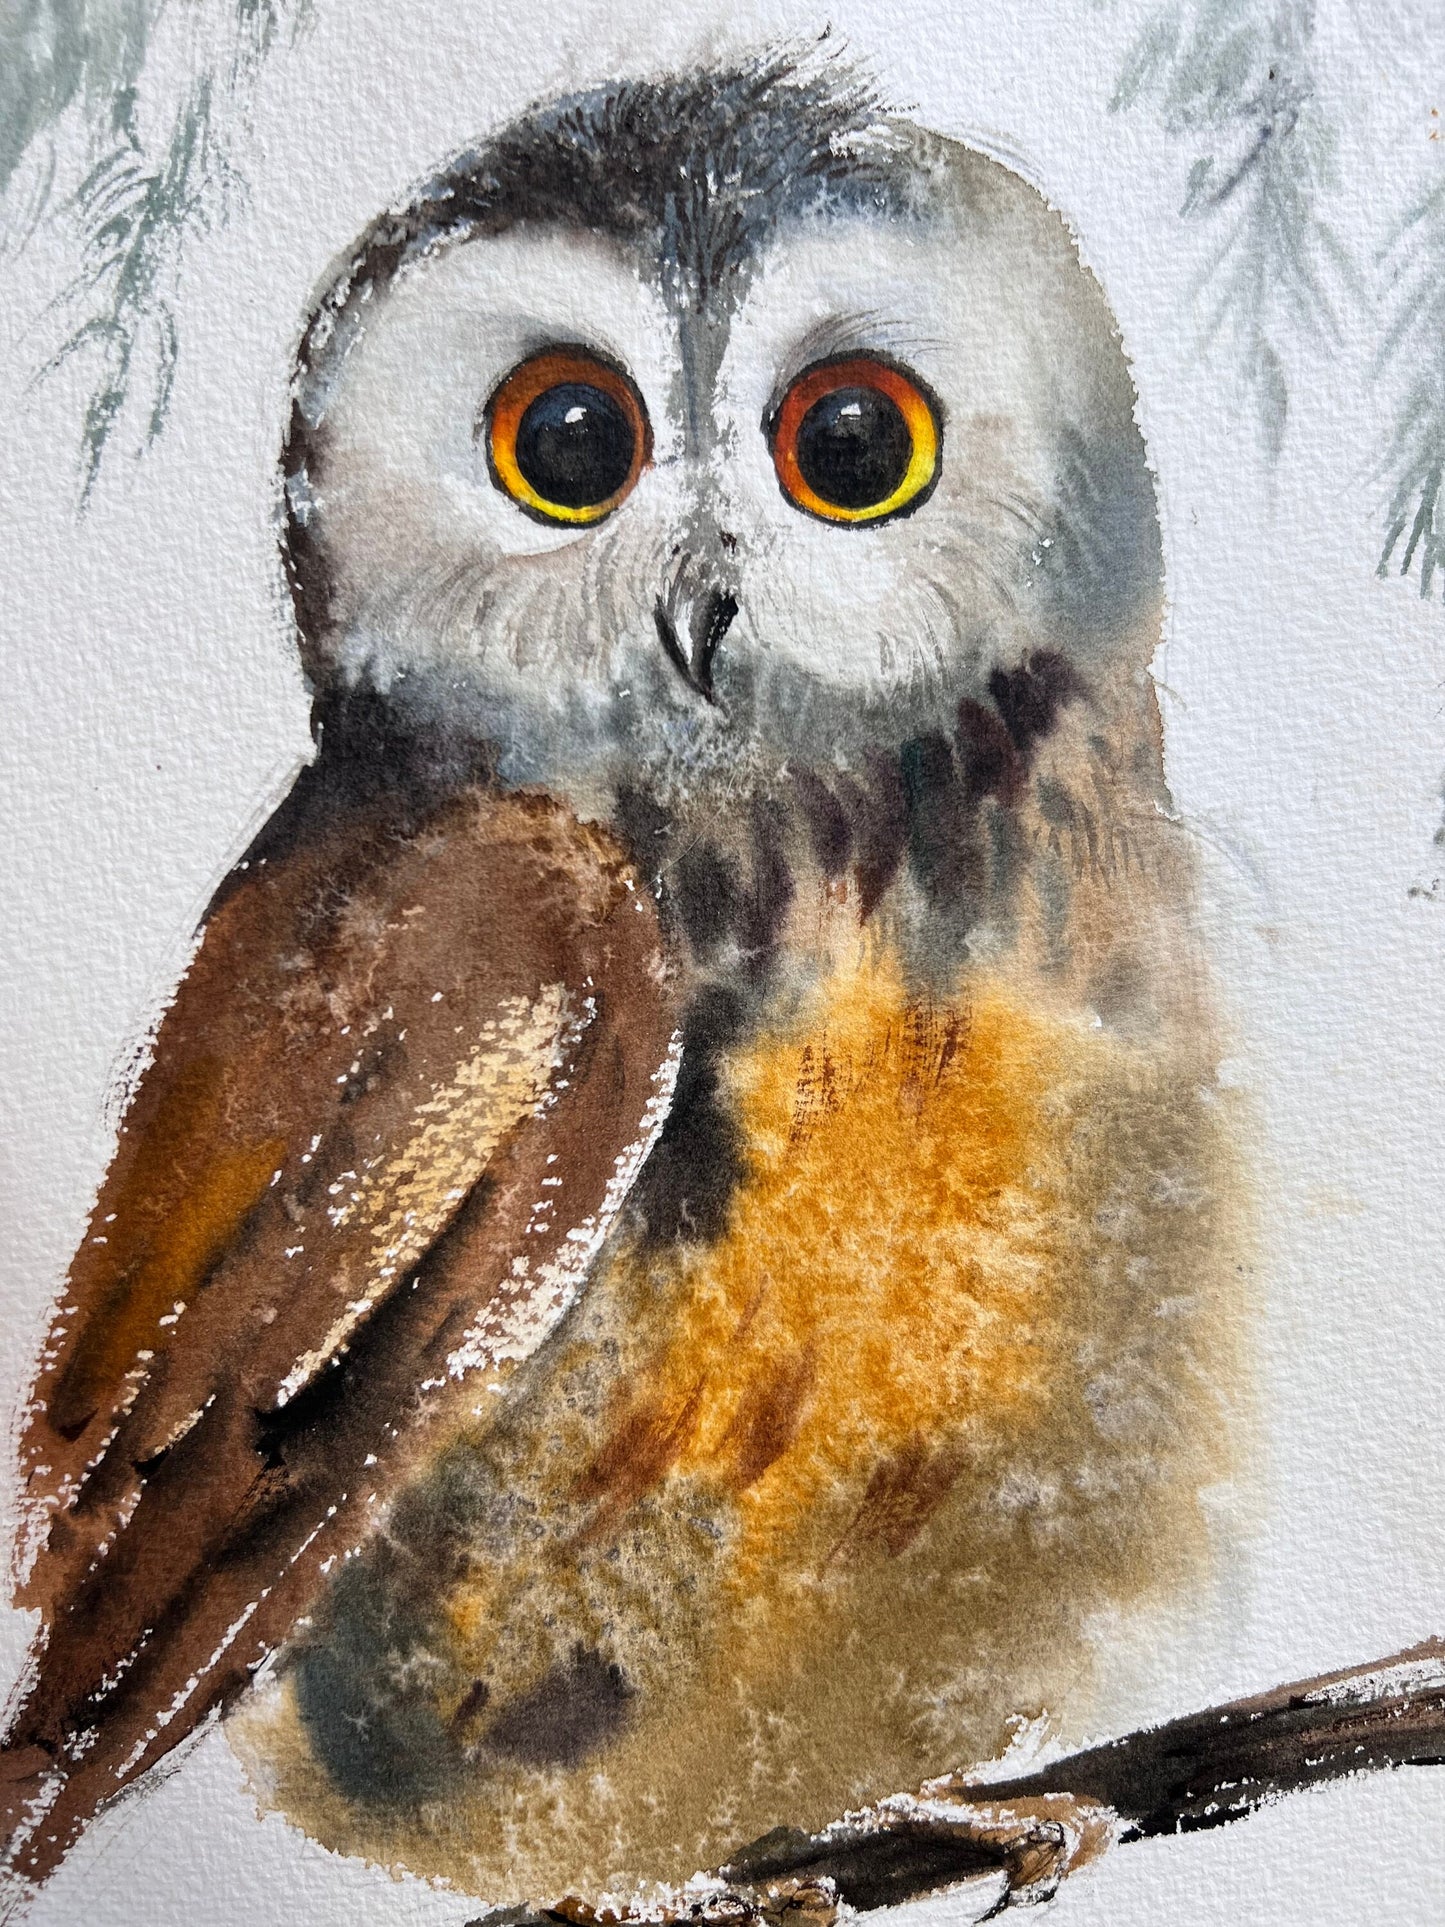 Owl Watercolor Painting Original, Small Artwork, New Year Christmas Gift For Bird Lover, Kids Room Wall Art Decor